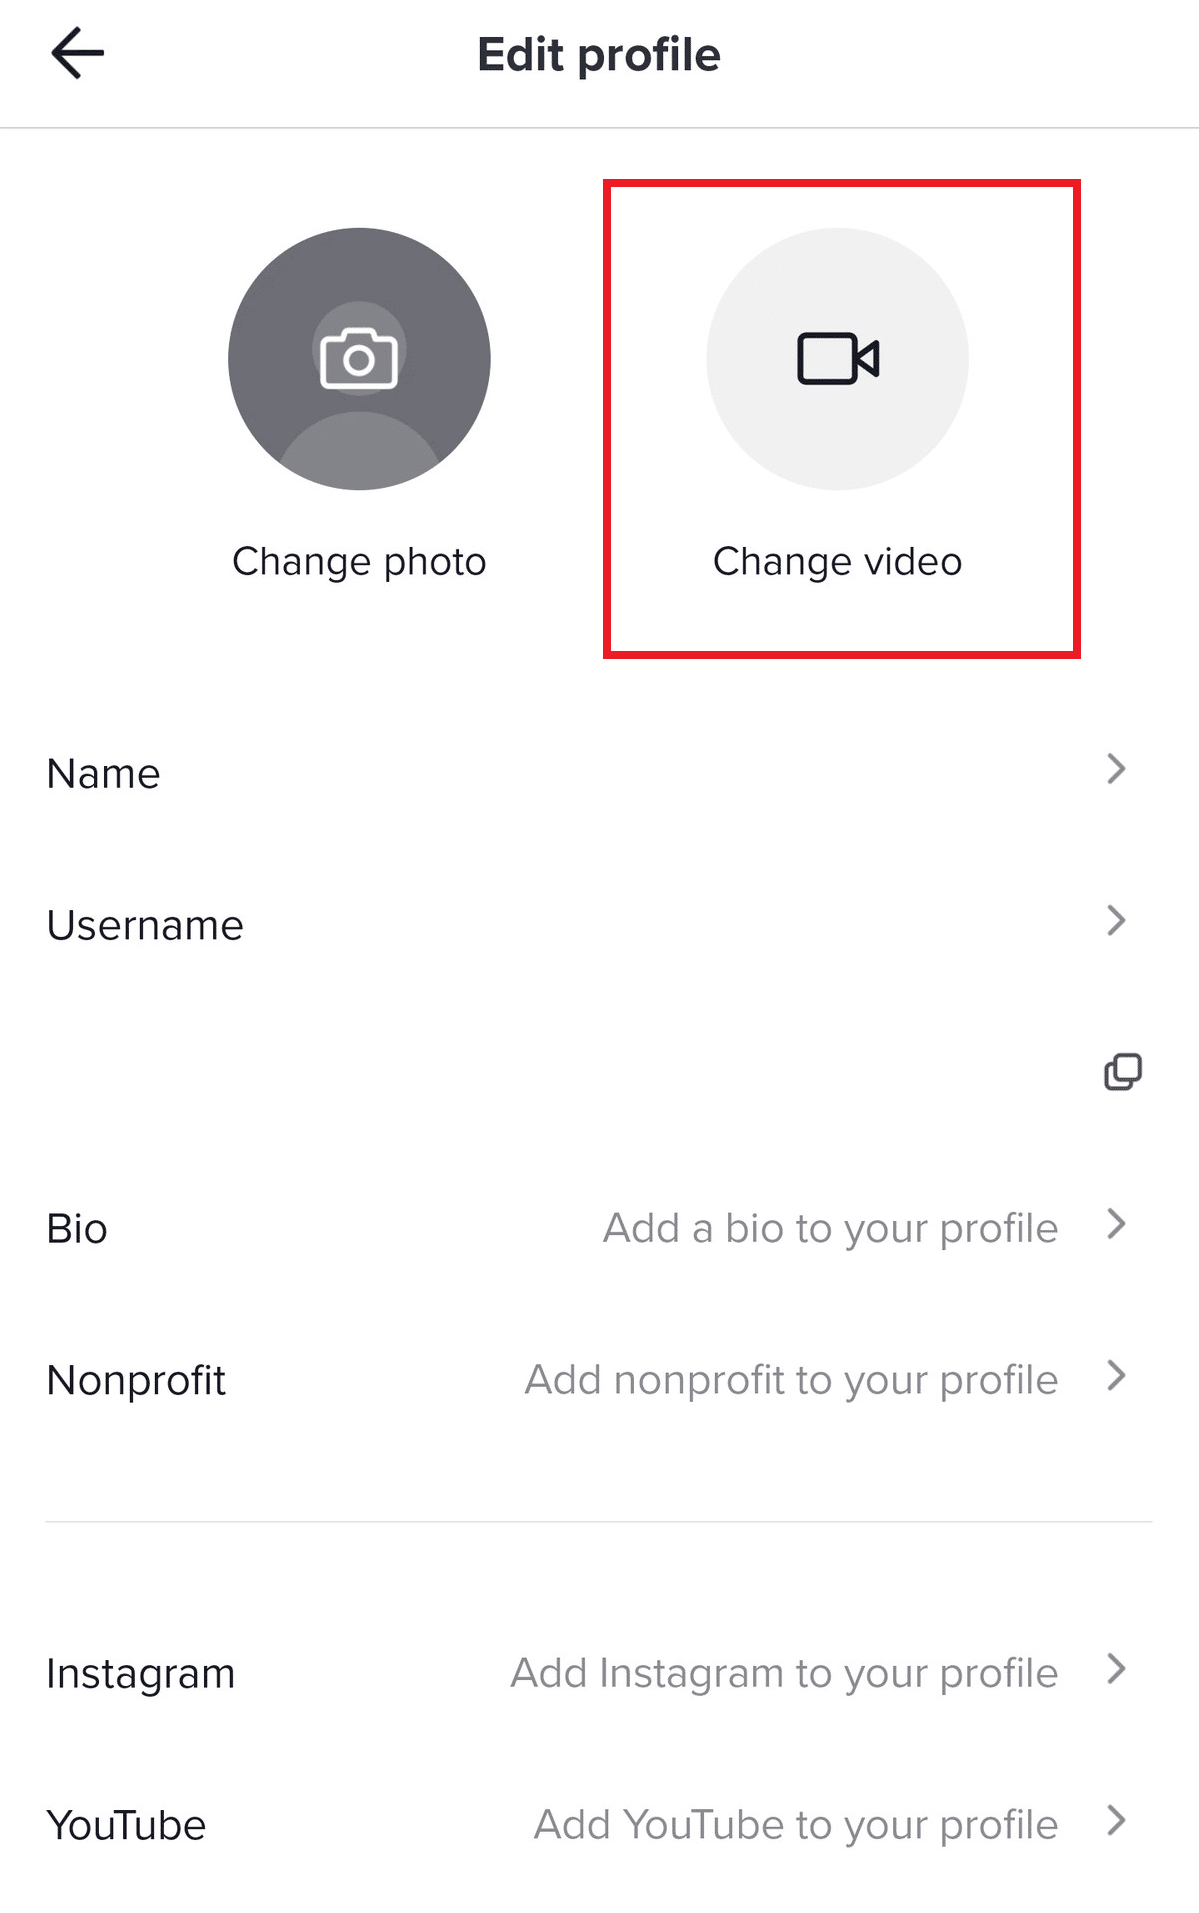 Tap on the Change video option